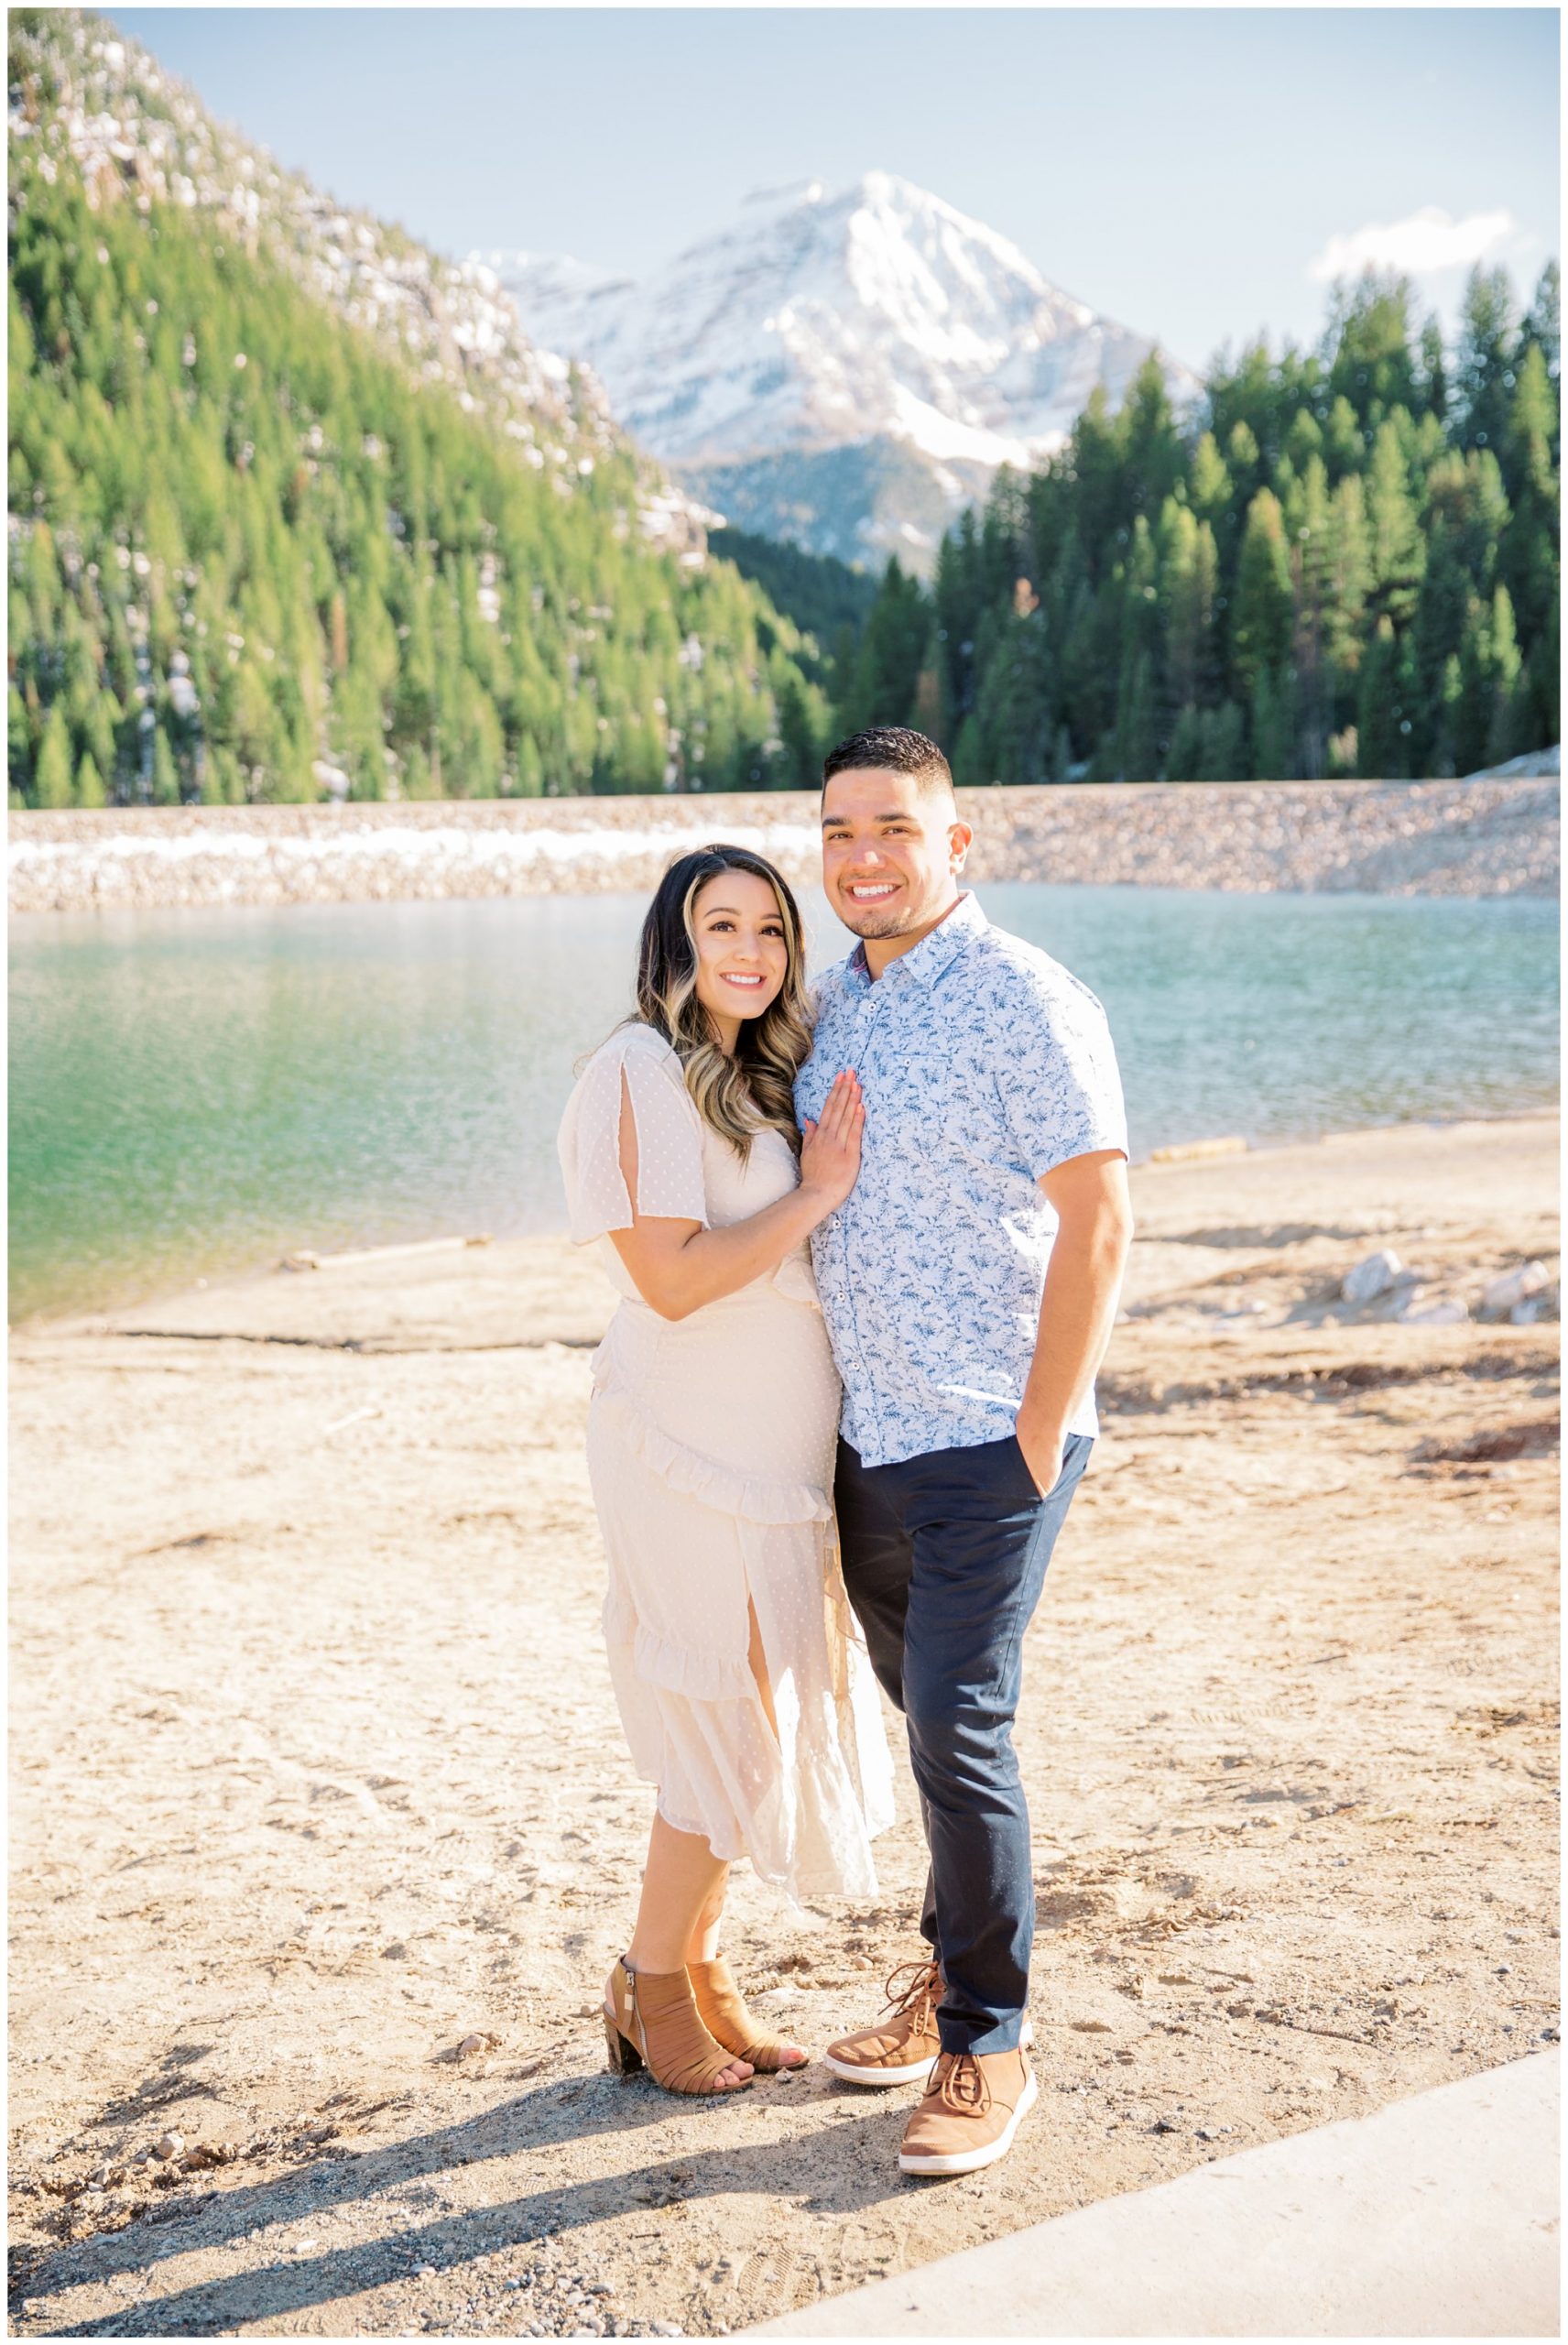 Engagement pictures at tibble fork reservoir in Utah up Provo Canyon